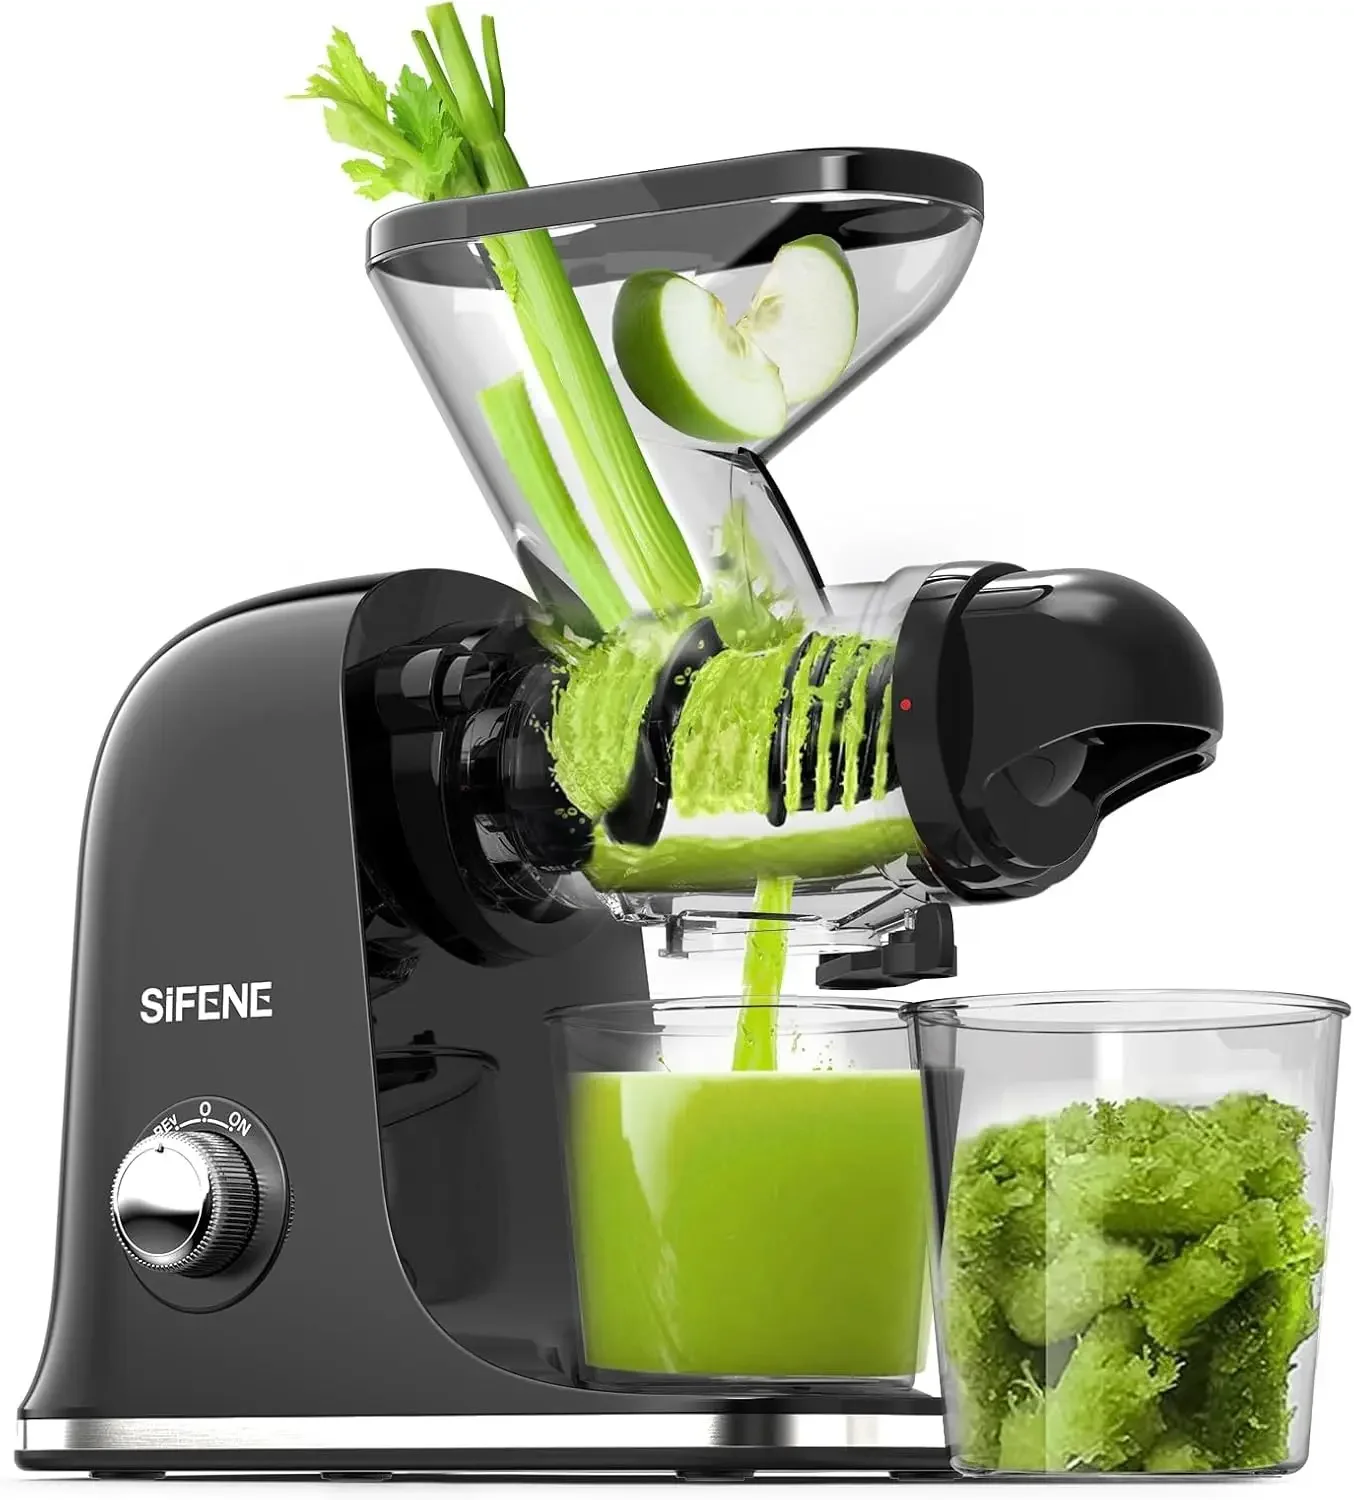 

Cold Press Juicer Machine, Compact Single Serve Slow Masticating Juicer, Vegetable and Fruit Juice Extractor Maker Squeezer, Eas